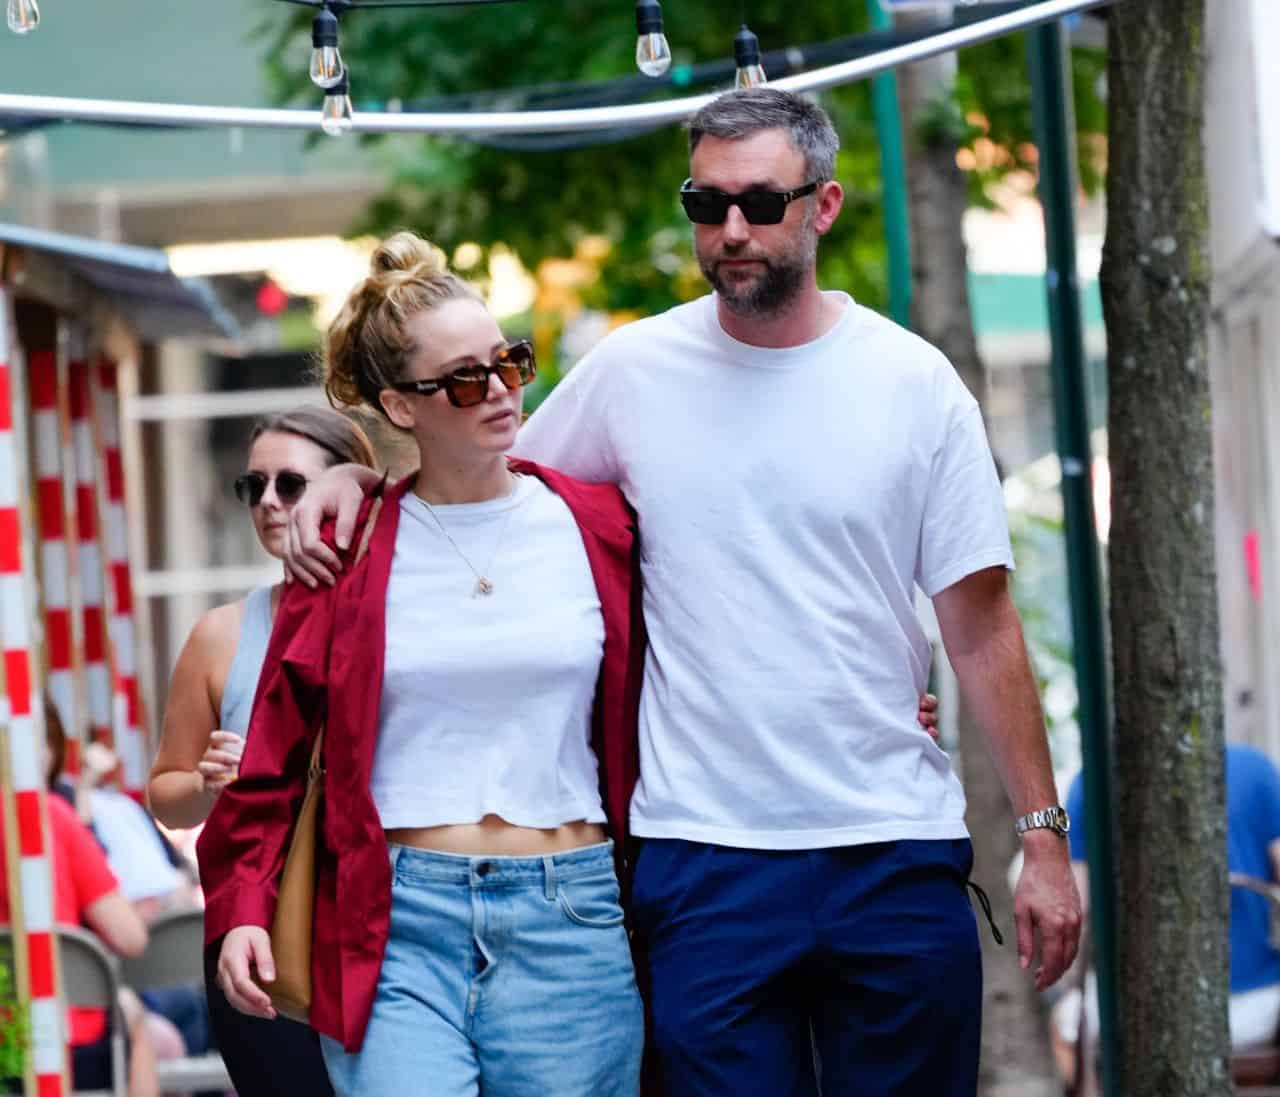 Jennifer Lawrence Wears Baggy Low-Rise Mom Jeans During a Romantic Walk